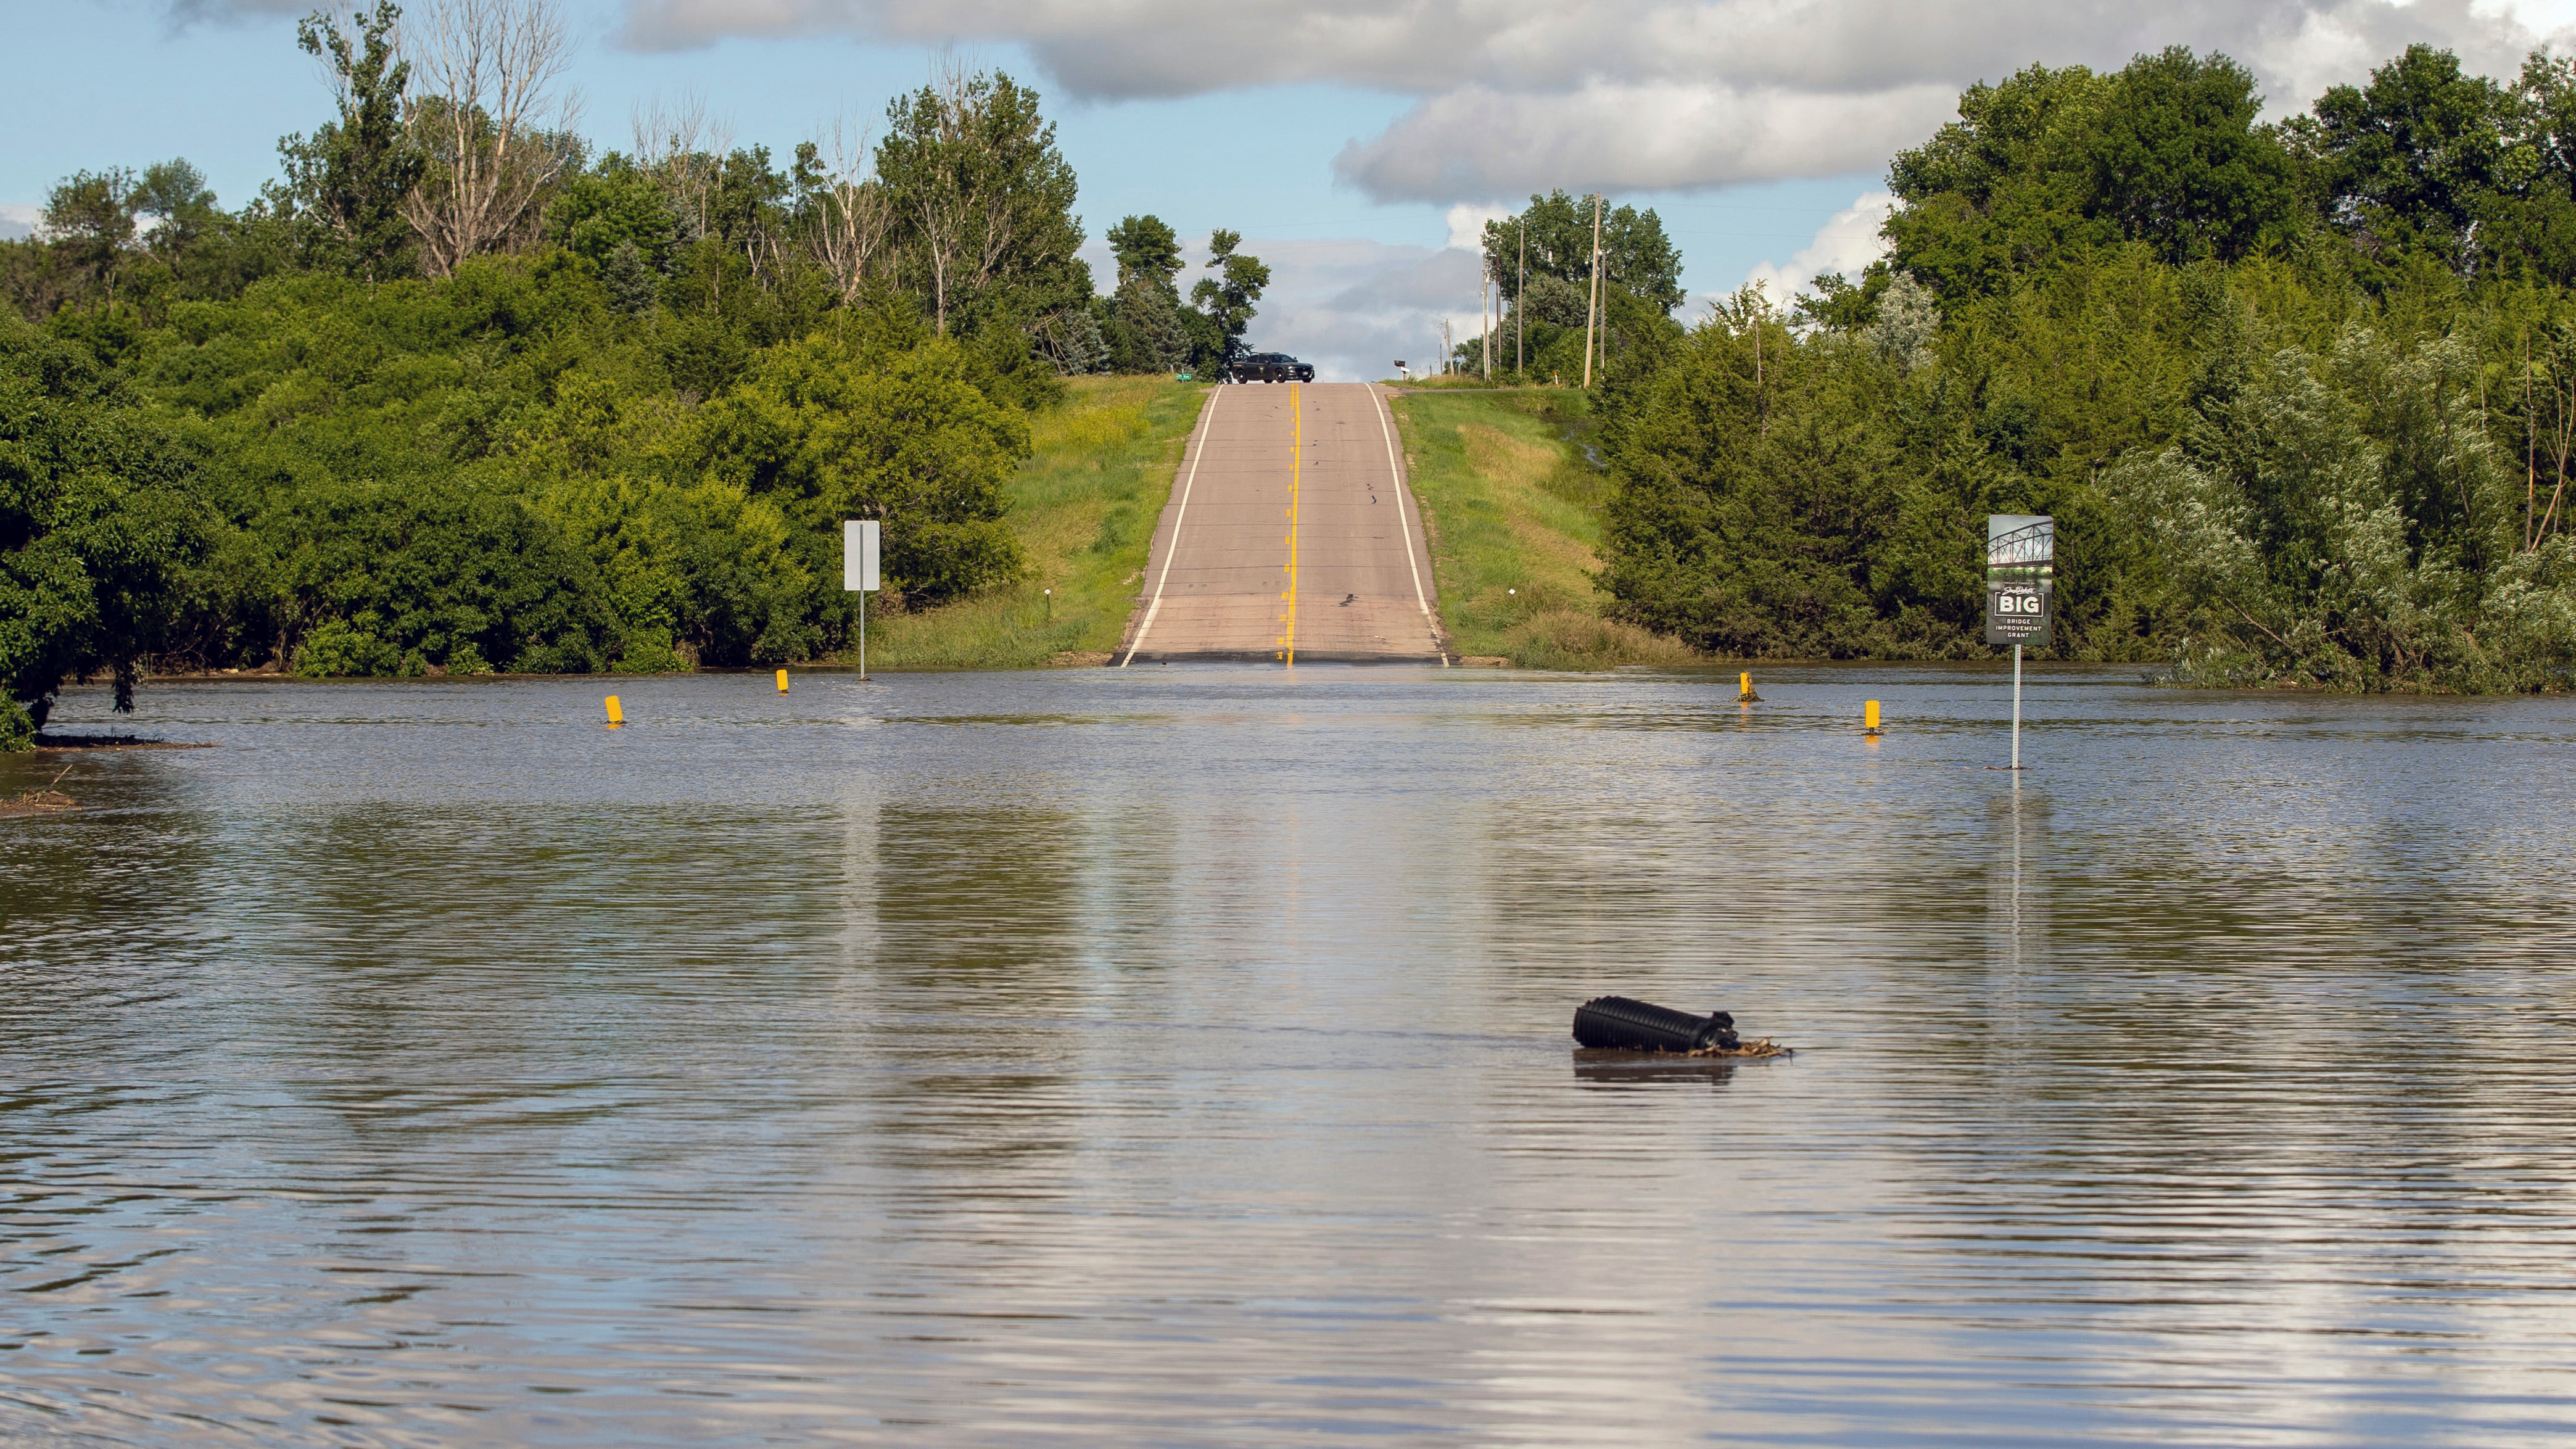 Flooding affected many areas in South Dakota (AP)